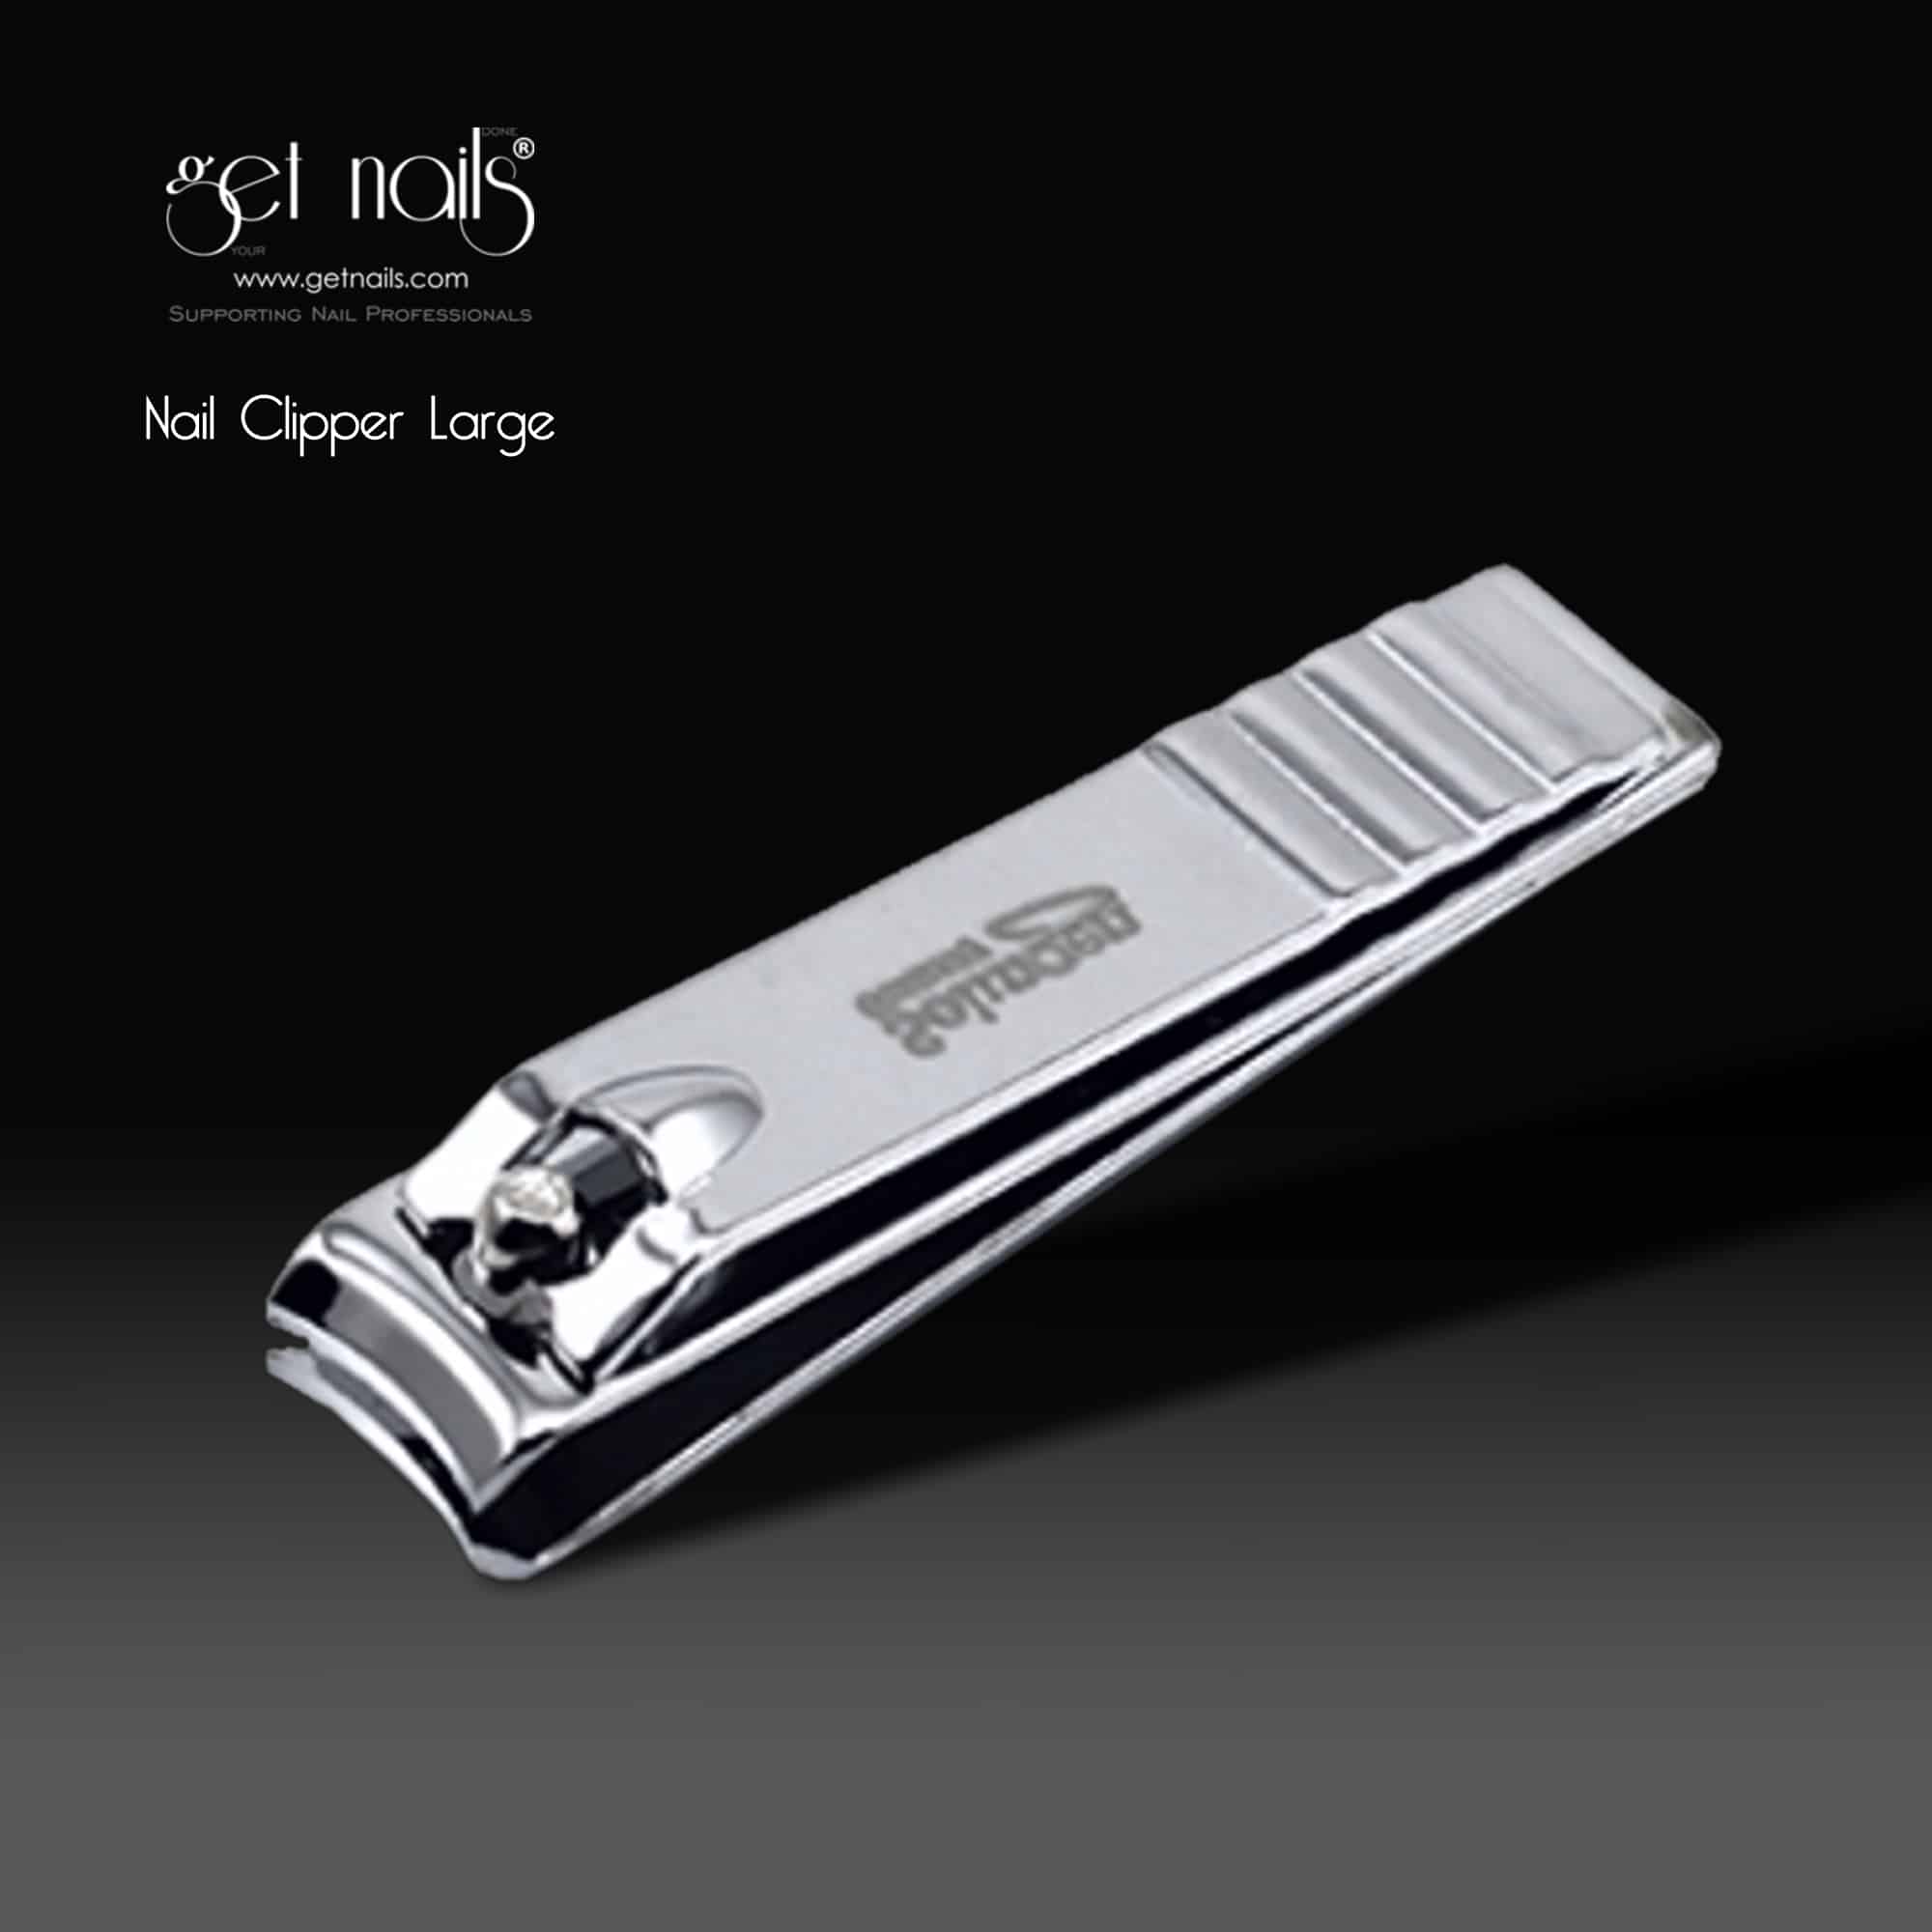 Nail clippers large – Get Nails